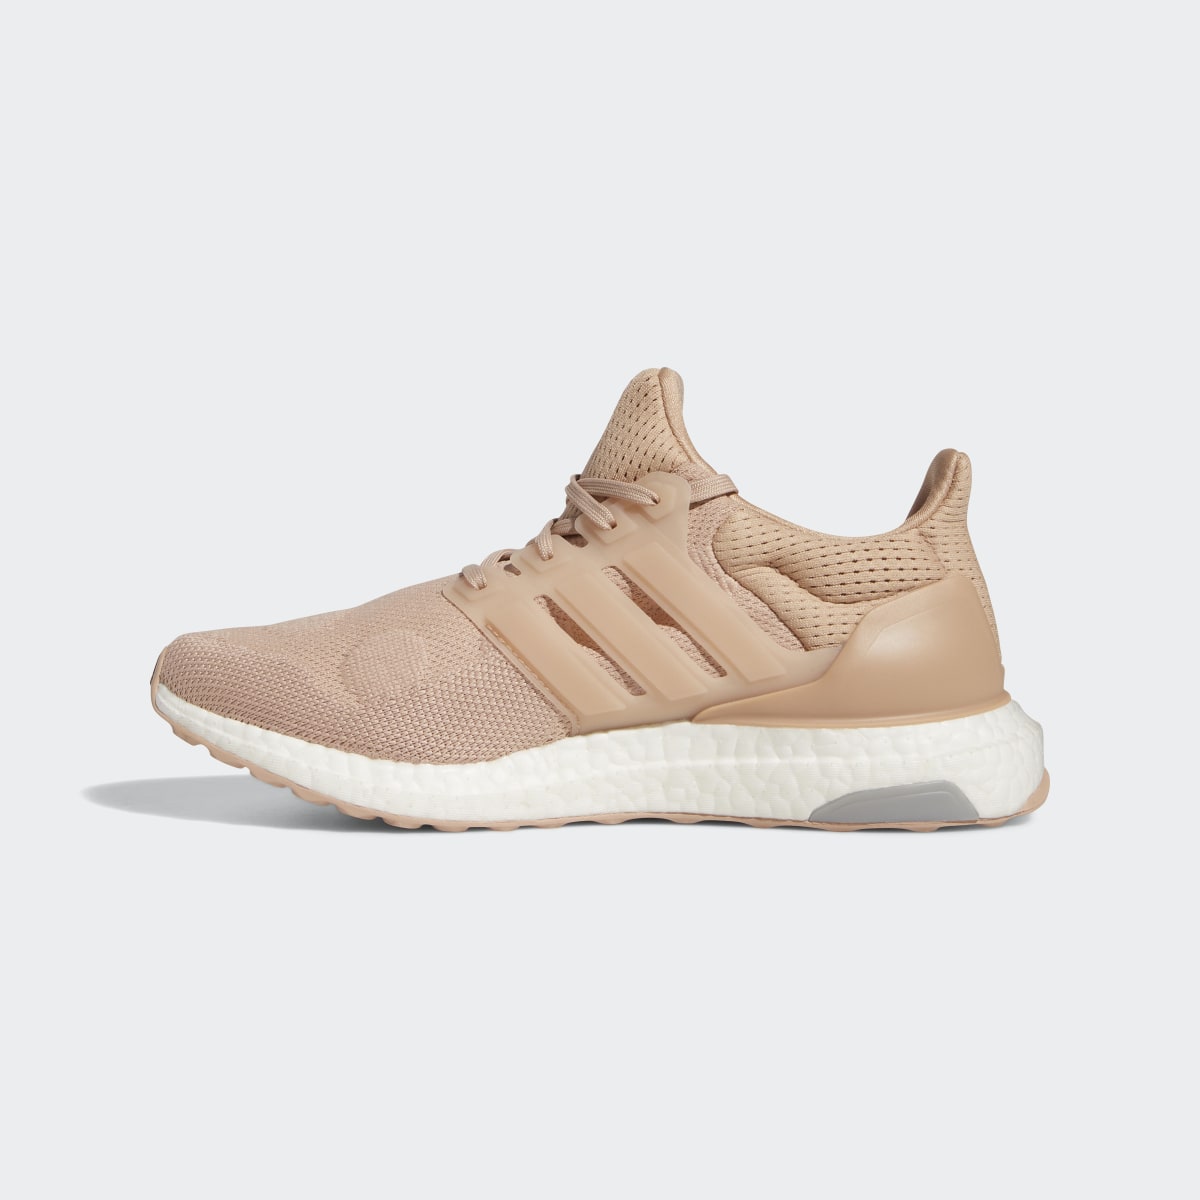 Adidas Ultraboost 1.0 DNA Shoes. 9